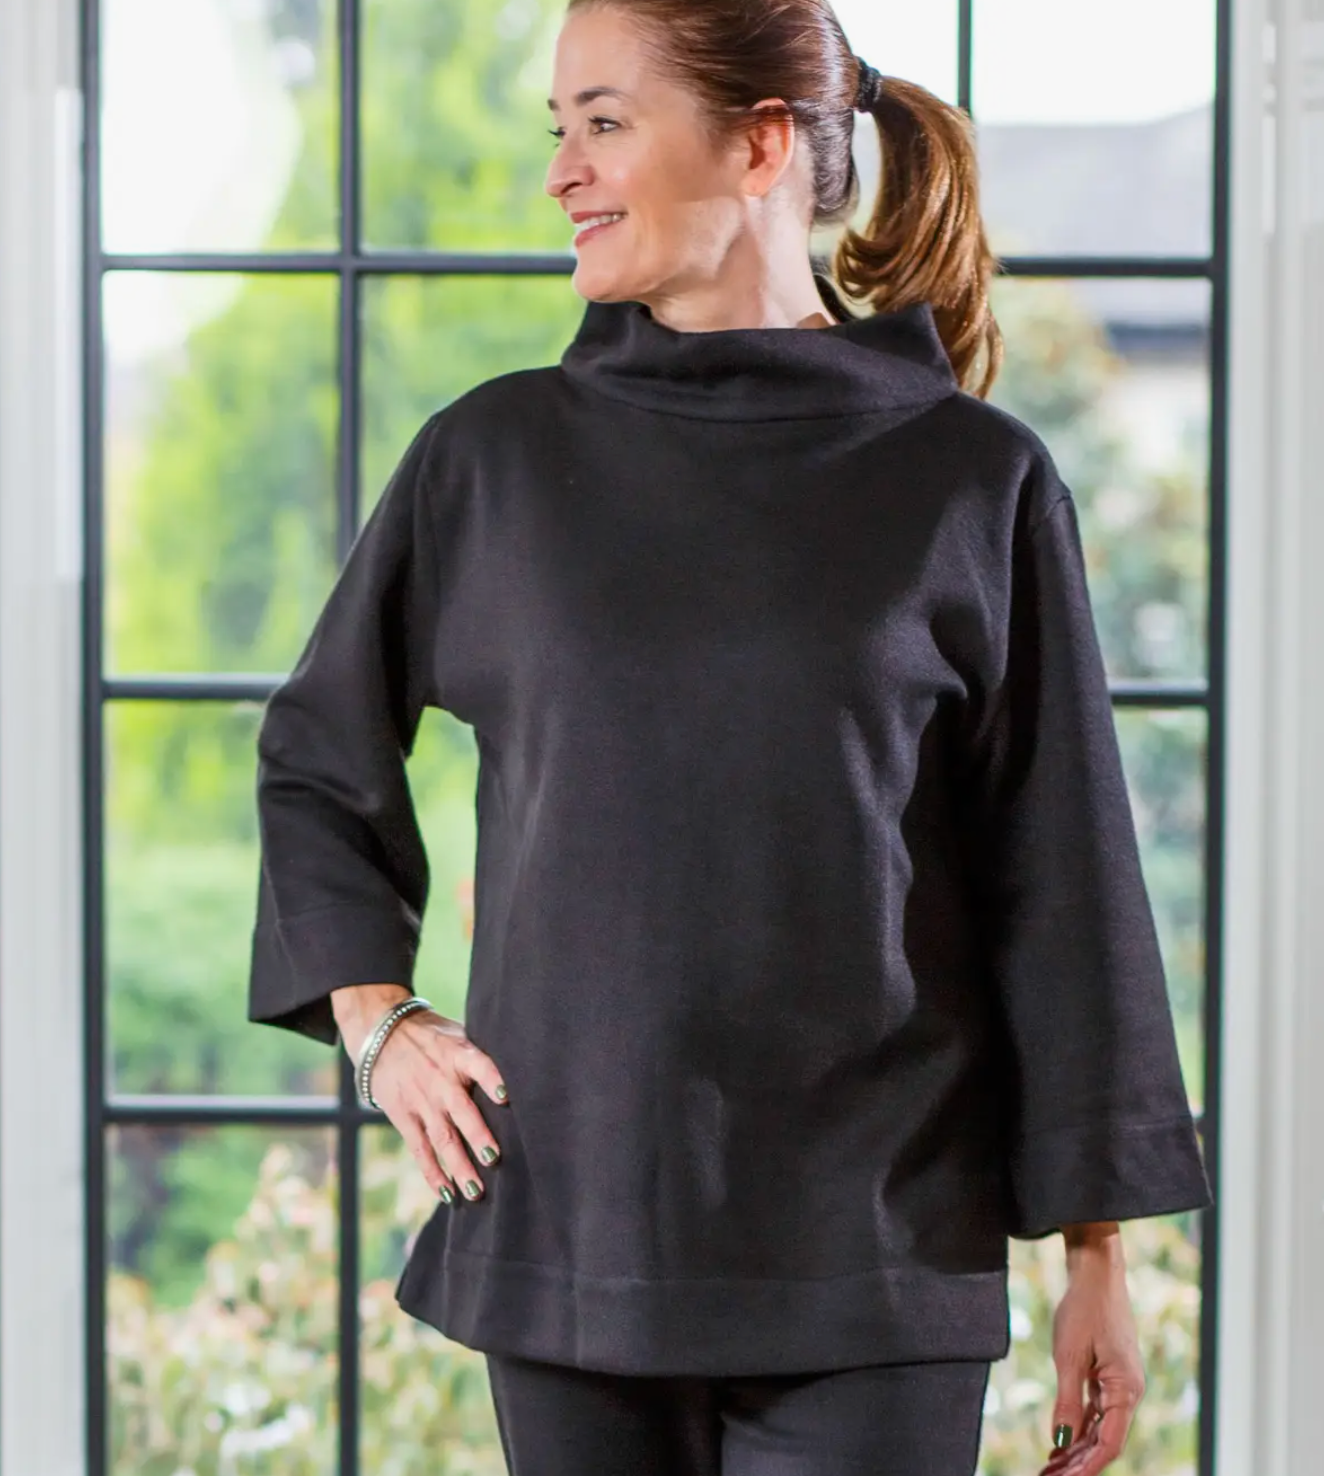 Experience the harmony of elegance and comfort with the Luna Mock Neck Top. Crafted in a flattering silhouette, this top is perfect for those leisurely days when you want to look your best without sacrificing comfort.